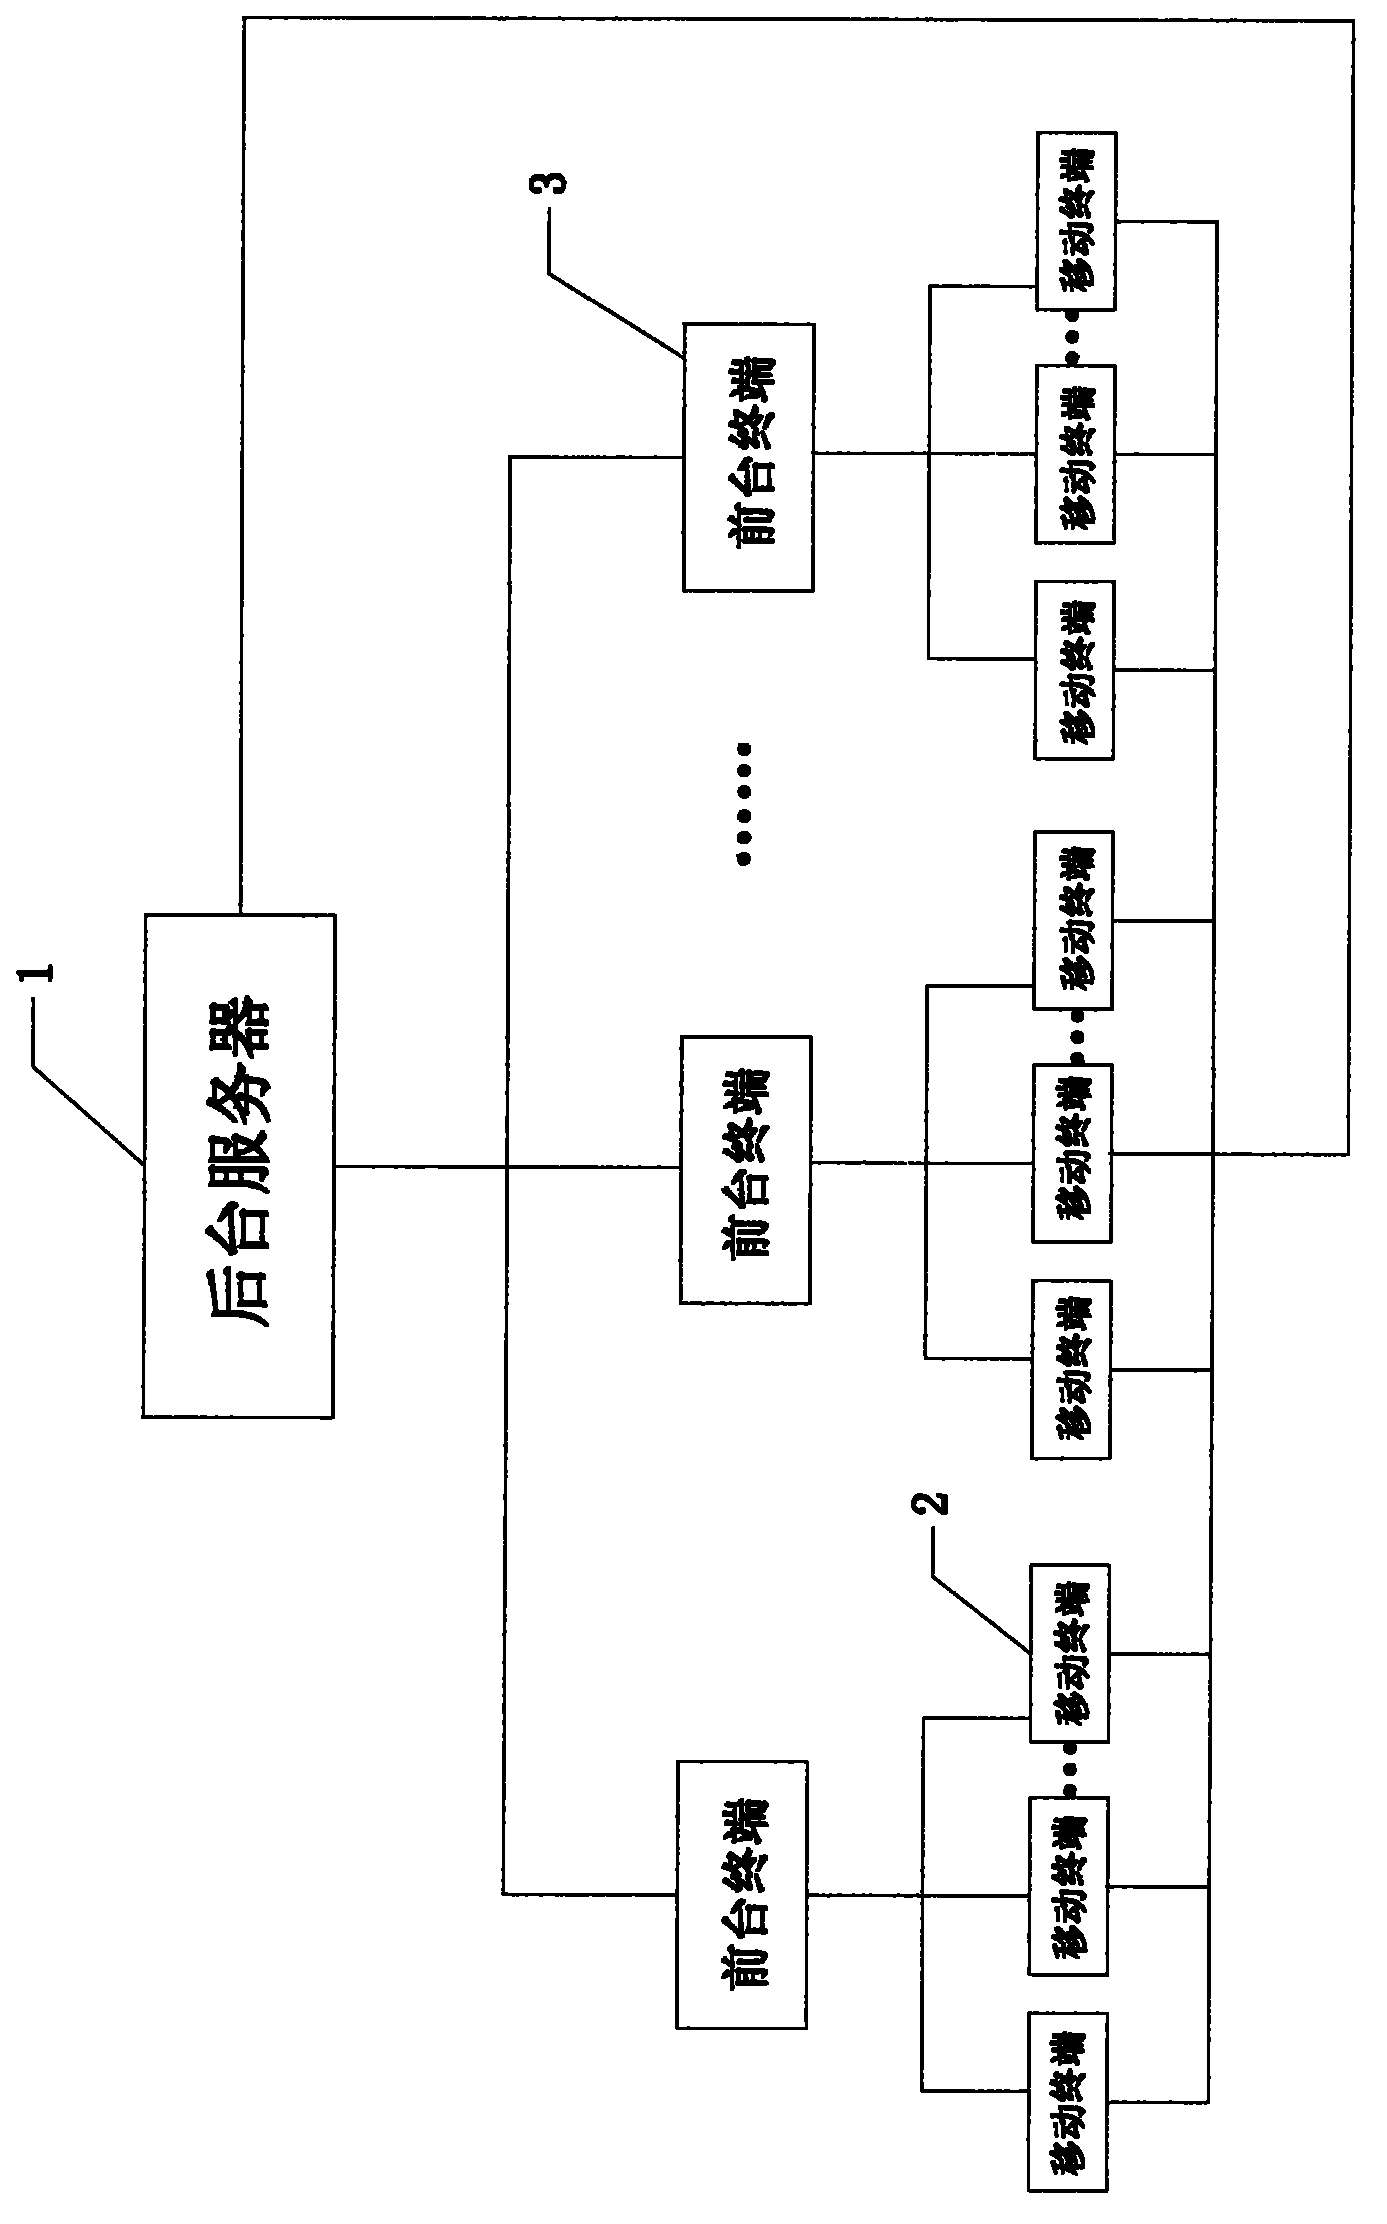 Intelligent hotel workflow management system, process management method and check-in registering method